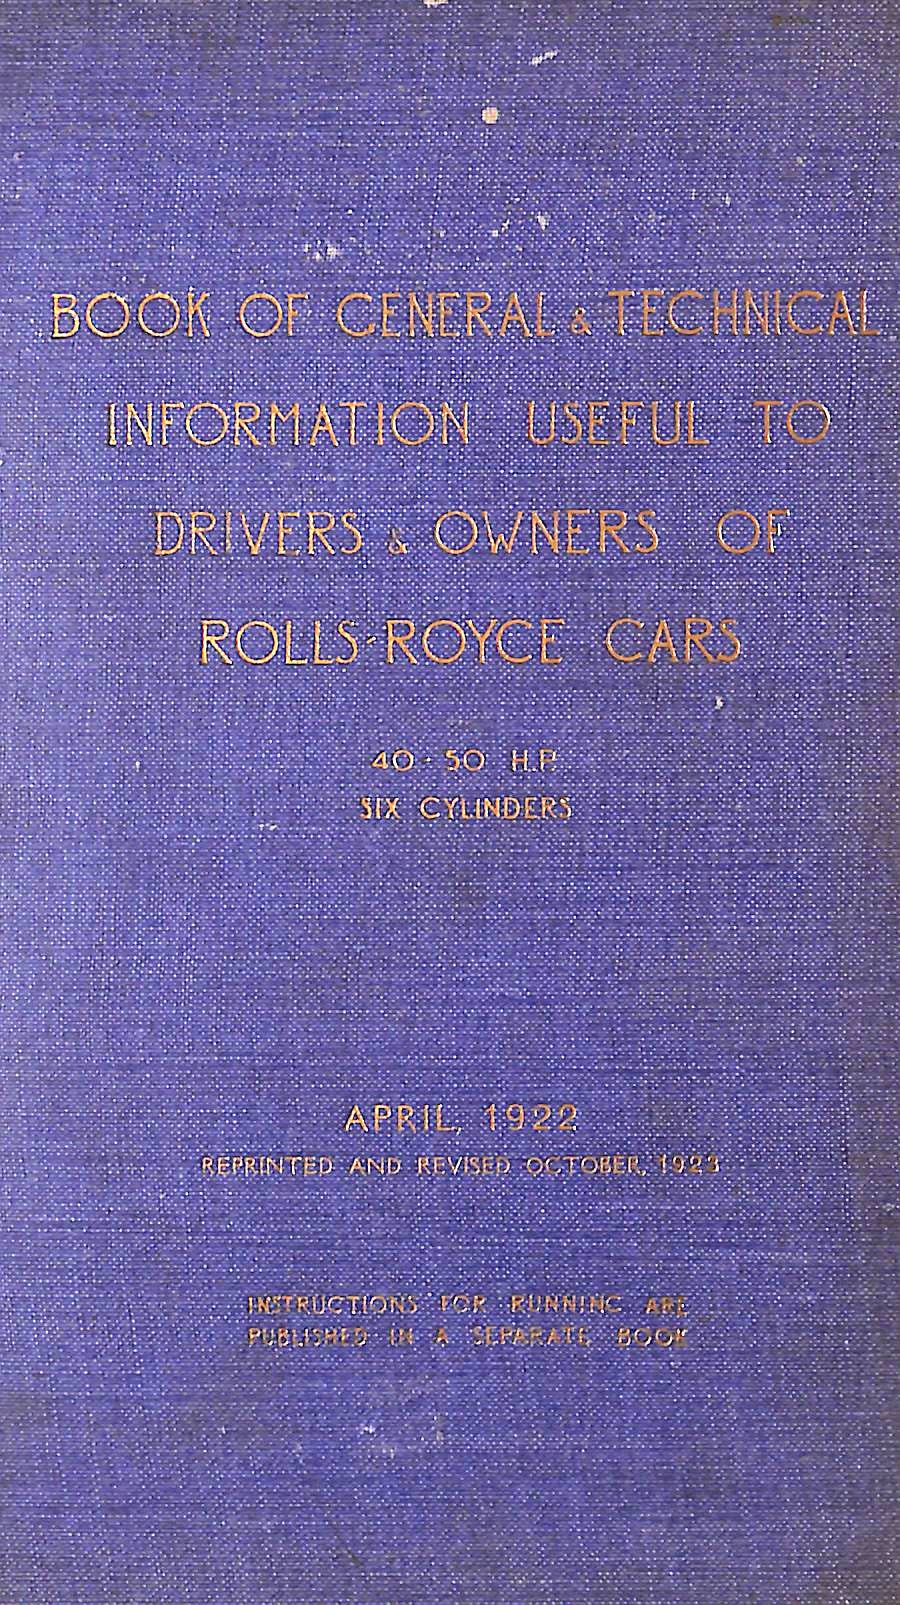 "Book Of General & Technical Information Useful To Drivers & Owners Of Rolls-Royce Cars" 1922 (SOLD)